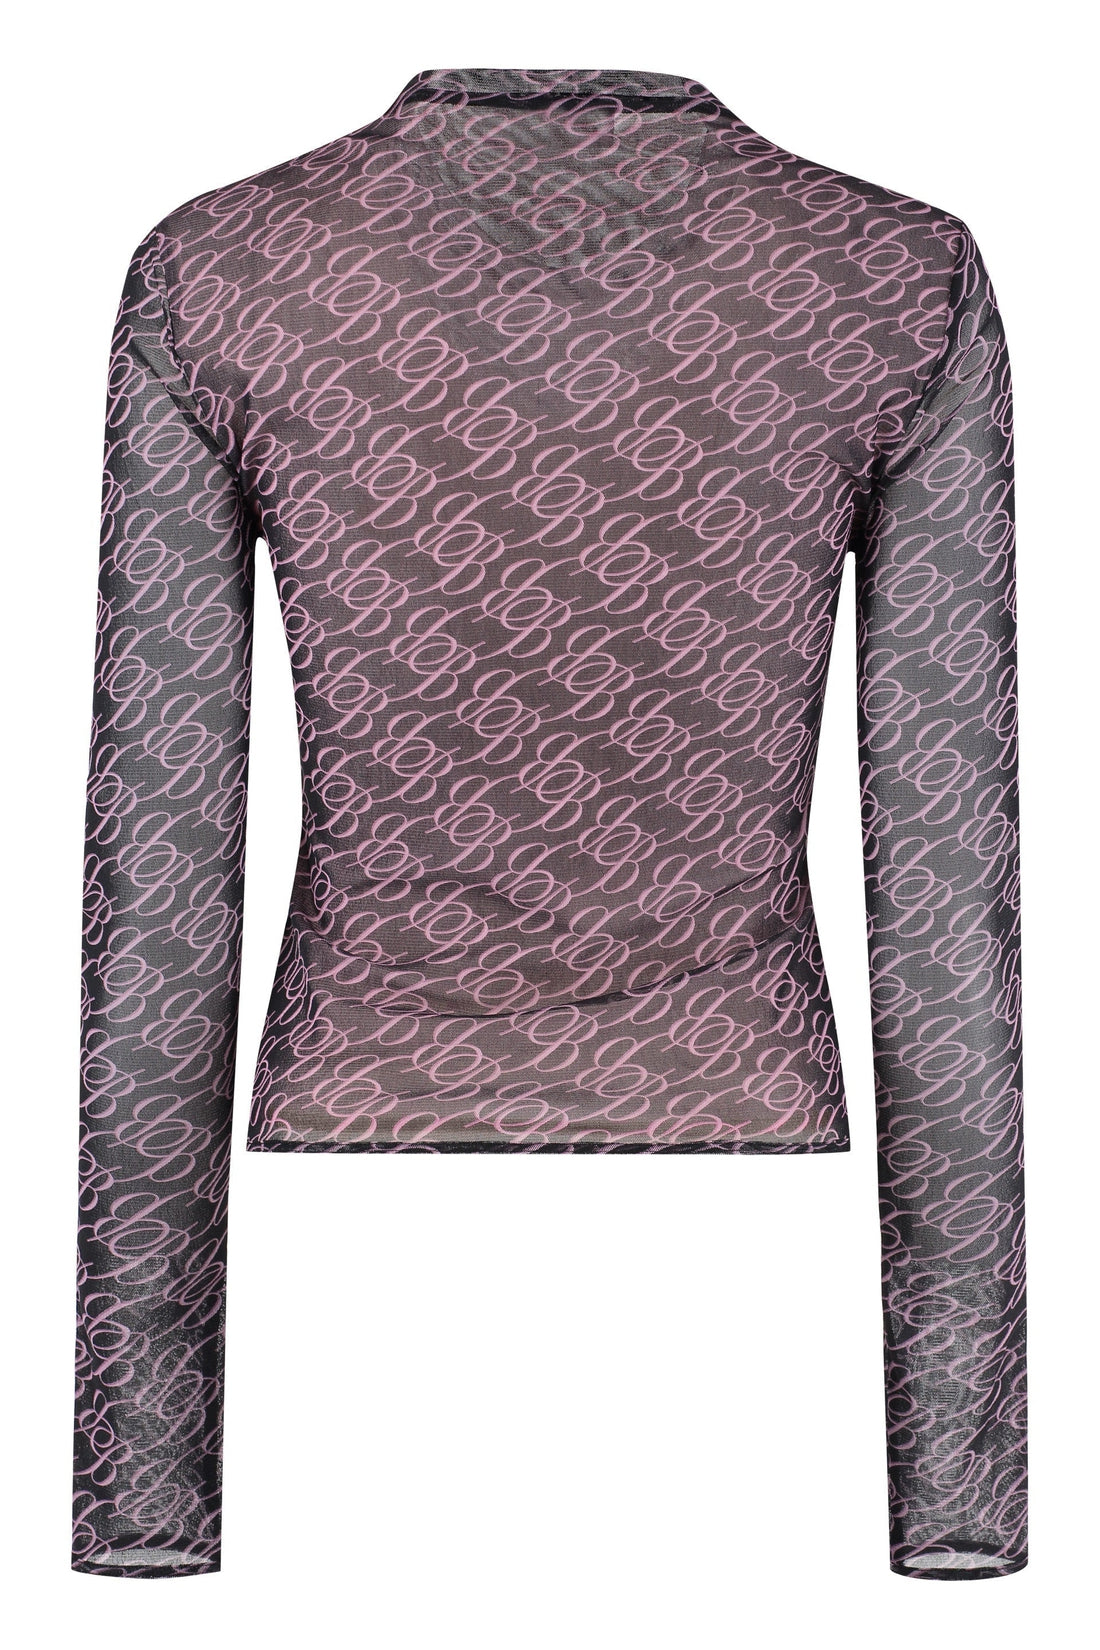 Blumarine-OUTLET-SALE-Printed long-sleeve top-ARCHIVIST